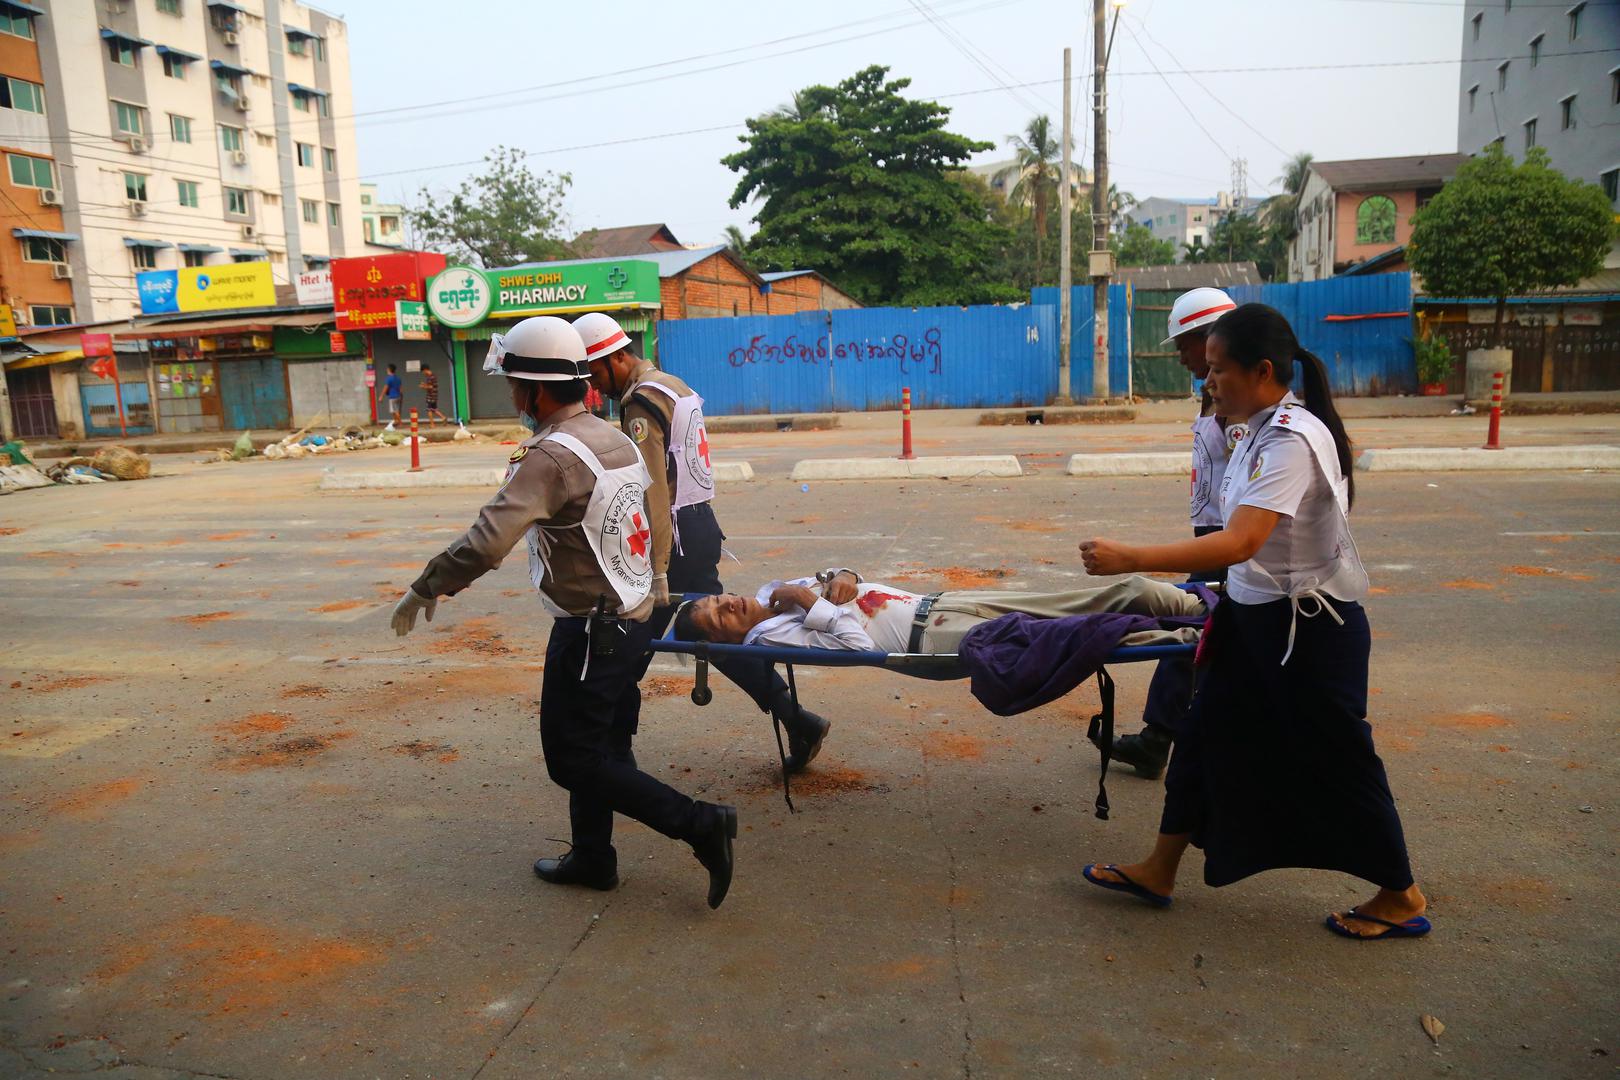 Myanmar red cross society volunteers carry a person who was shot during a security force crackdown on anti-coup protesters in Thingangyun, Yangon SENSITIVE MATERIAL. THIS IMAGE MAY OFFEND OR DISTURB    Myanmar red cross society volunteers carry a person who was shot during a security force crackdown on anti-coup protesters in Thingangyun, Yangon, Myanmar March 14, 2021. Picture taken on March 14, 2021. REUTERS/Stringer STRINGER